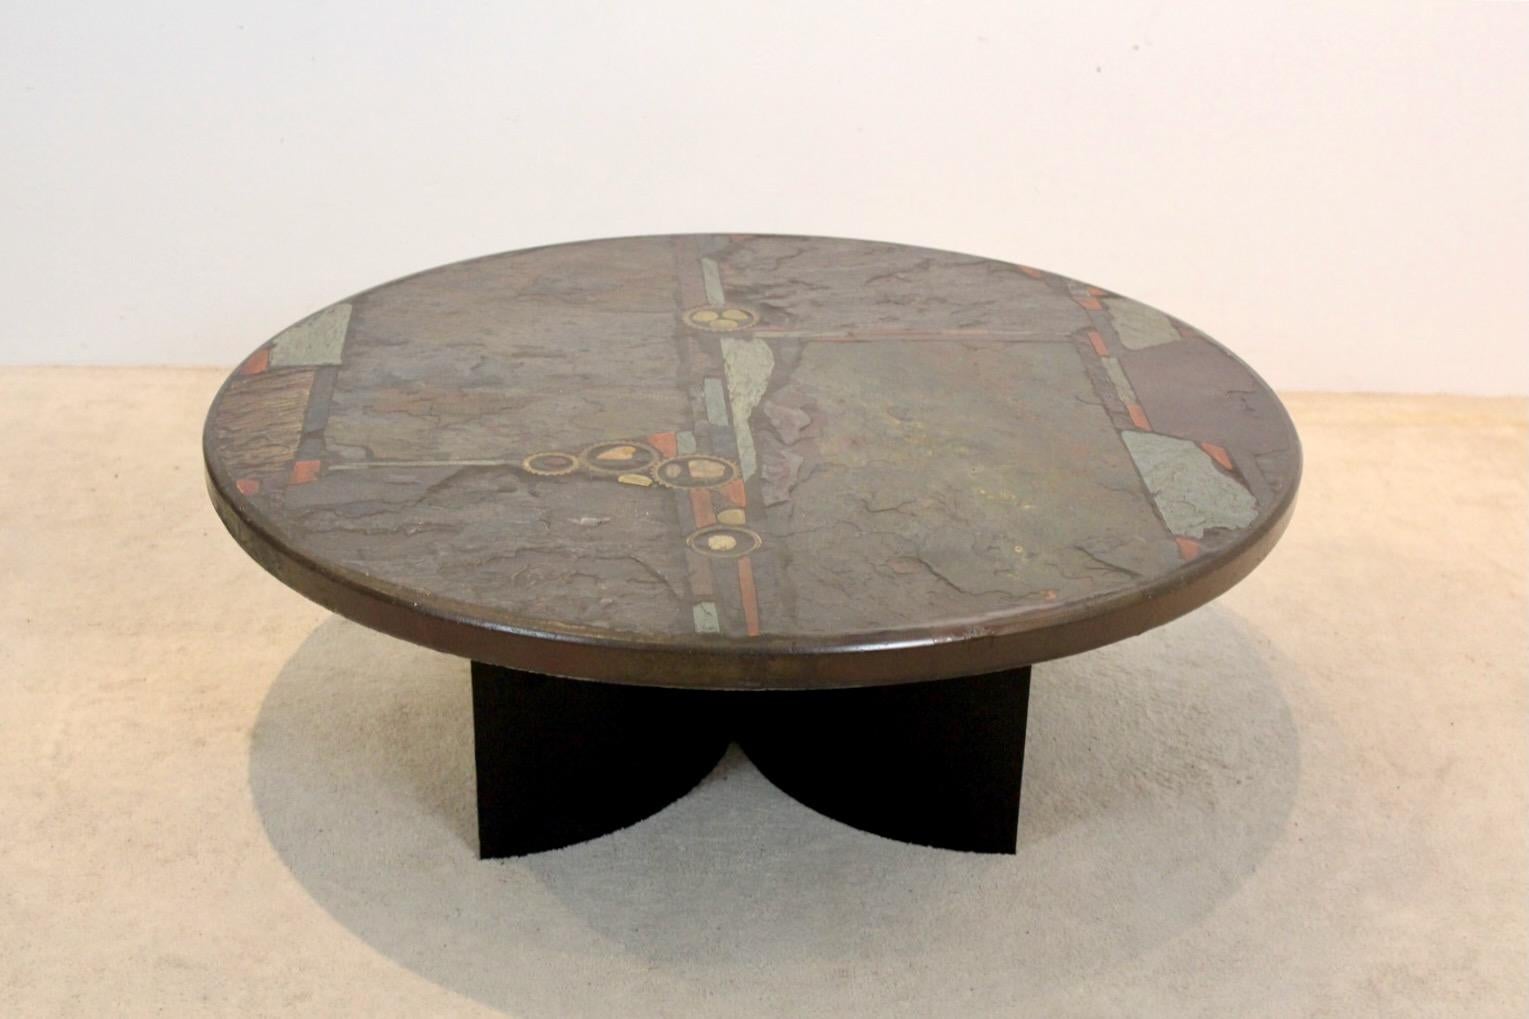 Fantastic and Unique Paul Kingma Art Slate Coffee Table with Metal Foot. Made and signed in the ‘80s for a client in the Netherlands. The table comes from the first owner and we even have an email sent by Paul Kingma to this first owner. The table